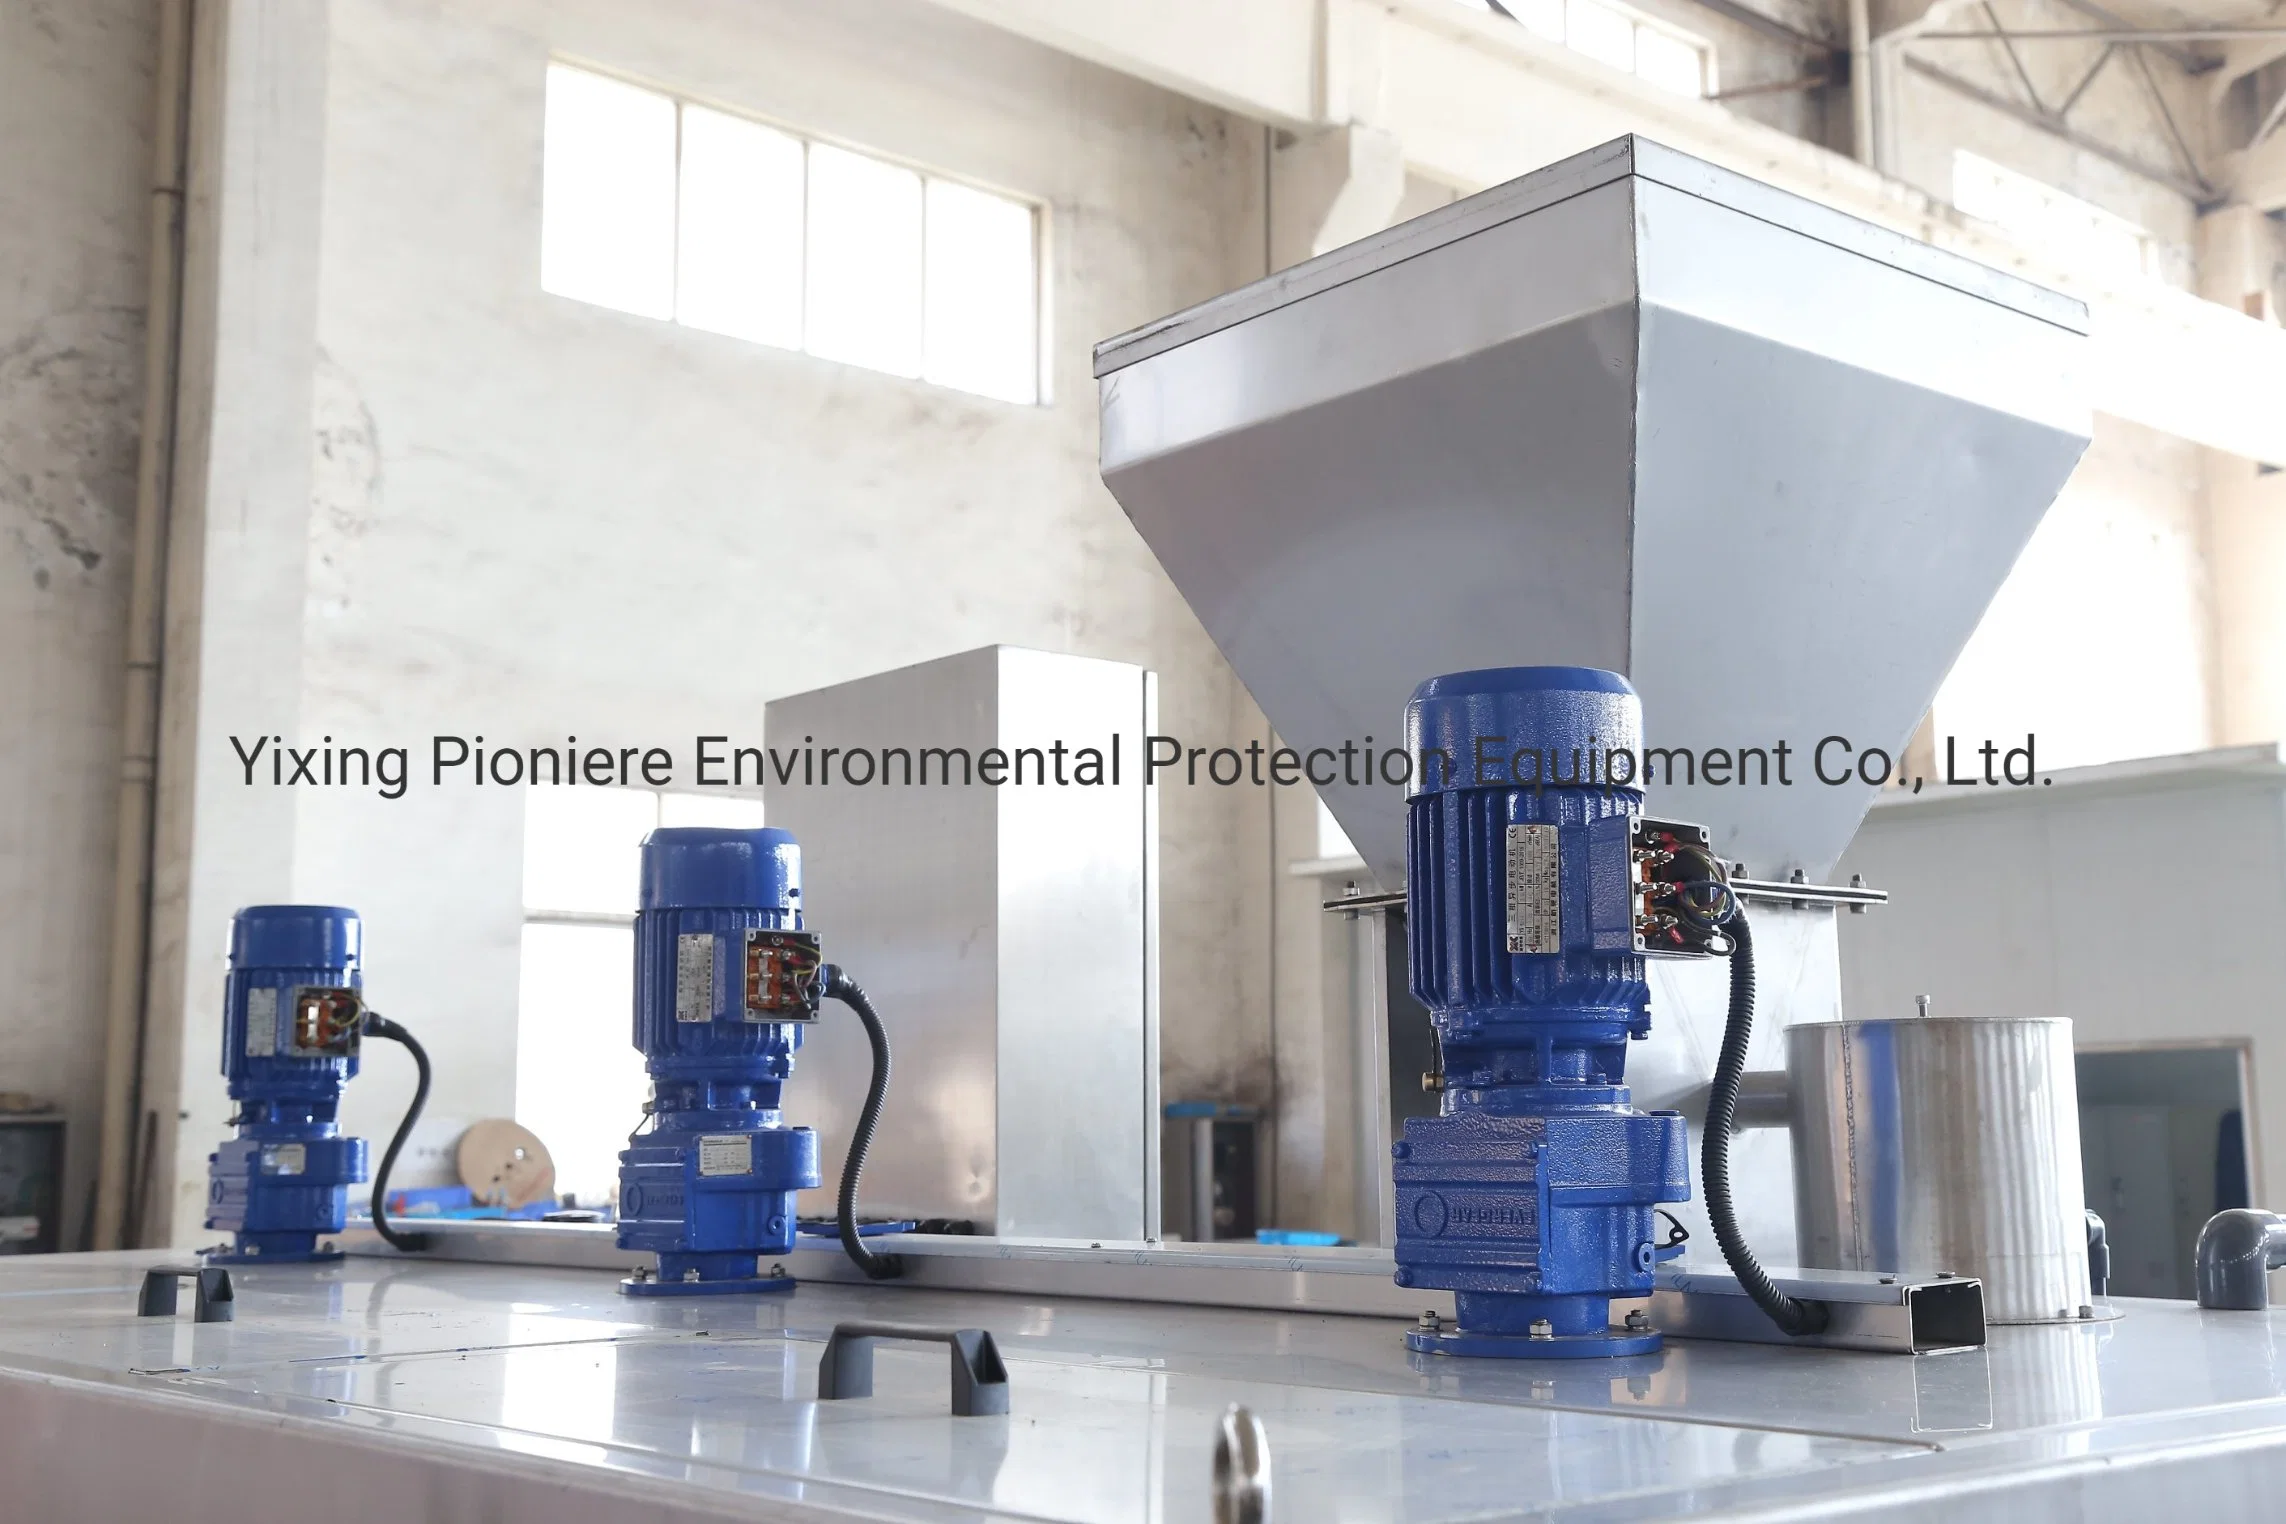 Automated Polymer Dispensing Machine for Municipal Wastewater